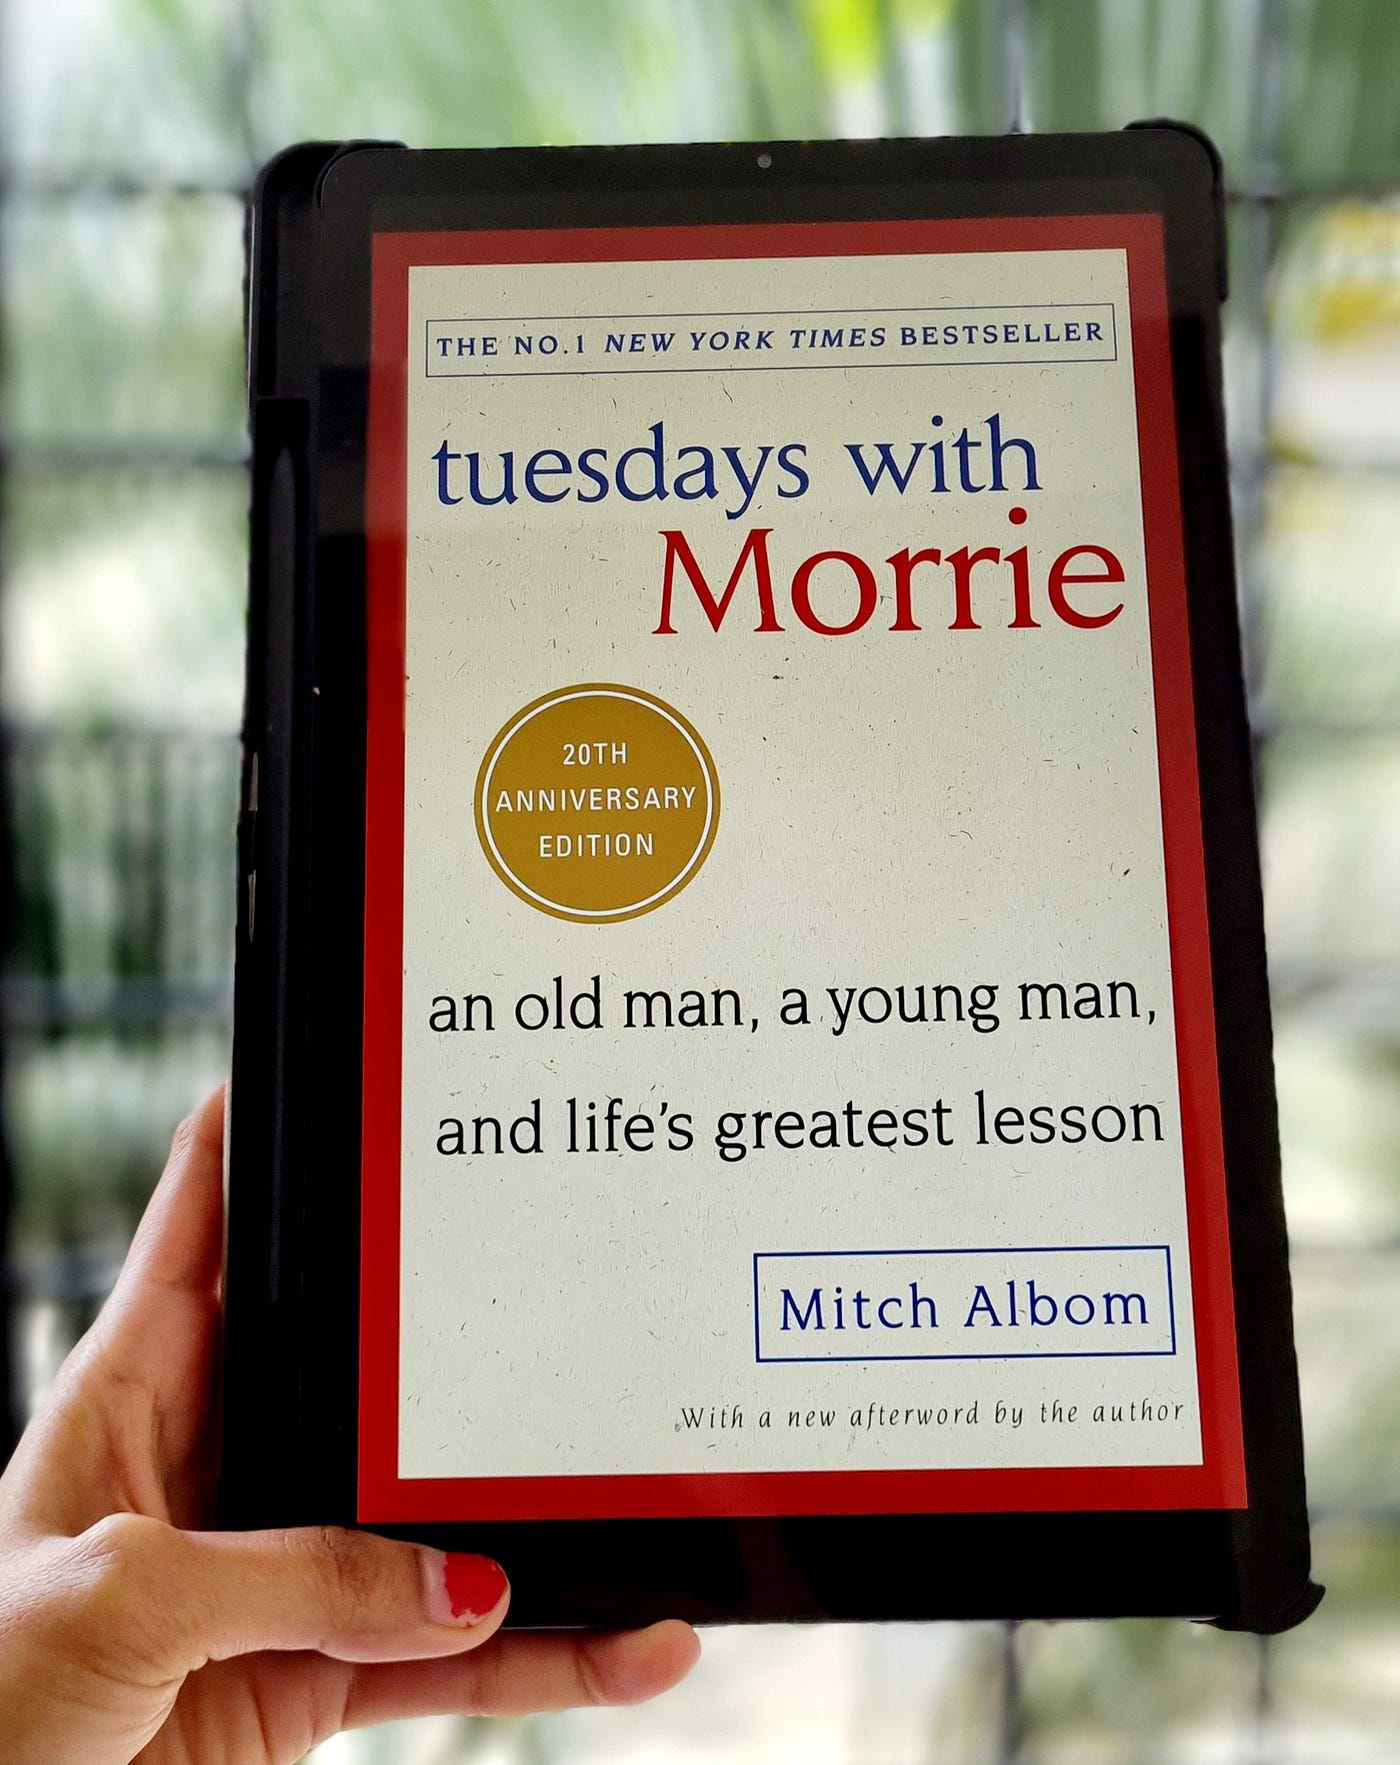 Tuesdays with Morrie - Busan English Library - OverDrive